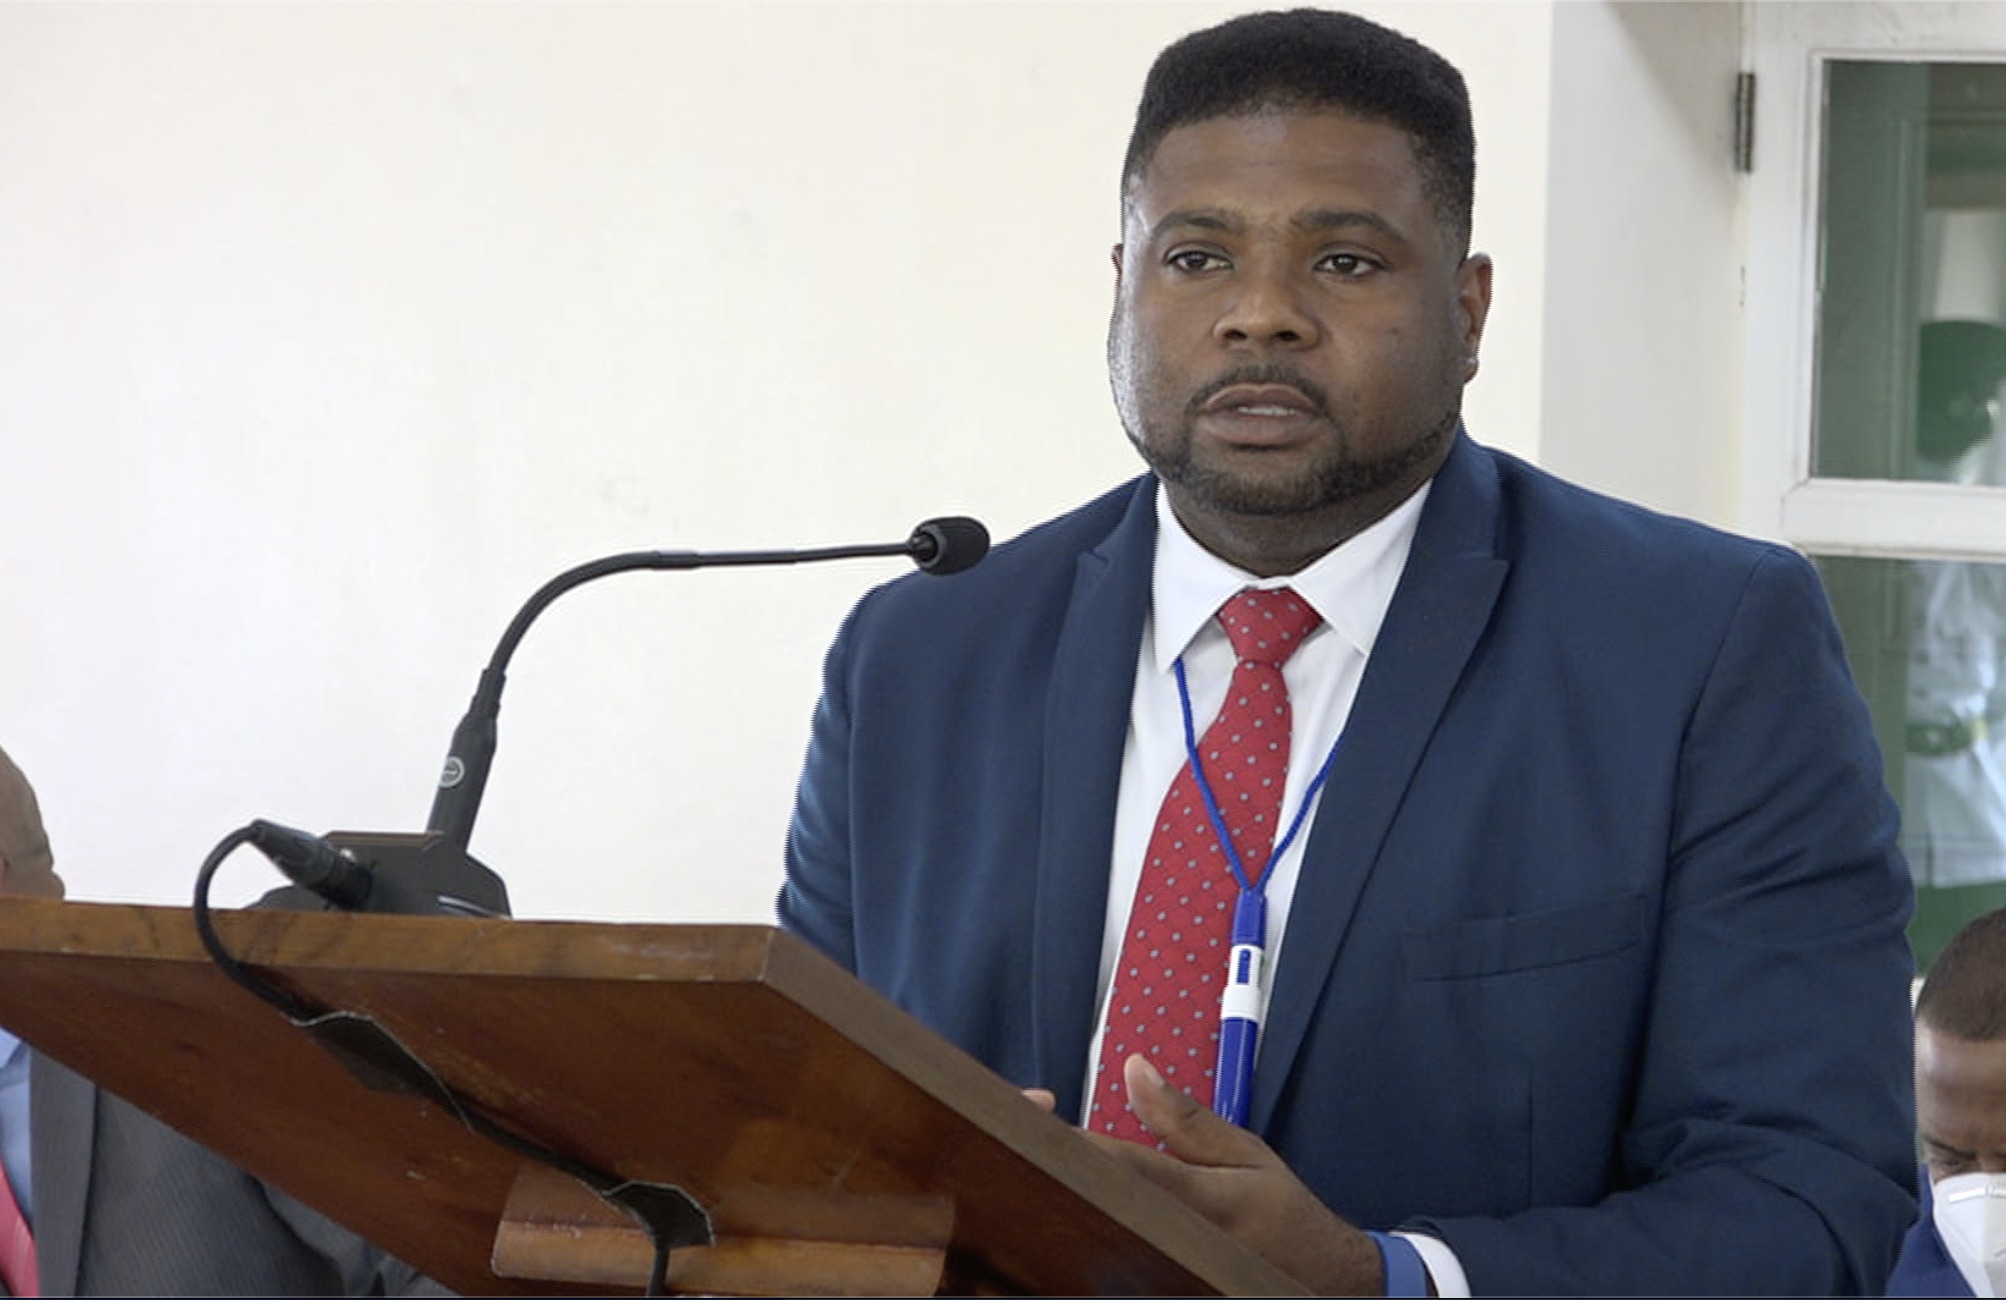 Hon. Troy Liburd, Junior Minister of Education in the Nevis Island Administration, making his presentation at a sitting of the Nevis Island Assembly Chambers at Hamilton House on July 02, 2020